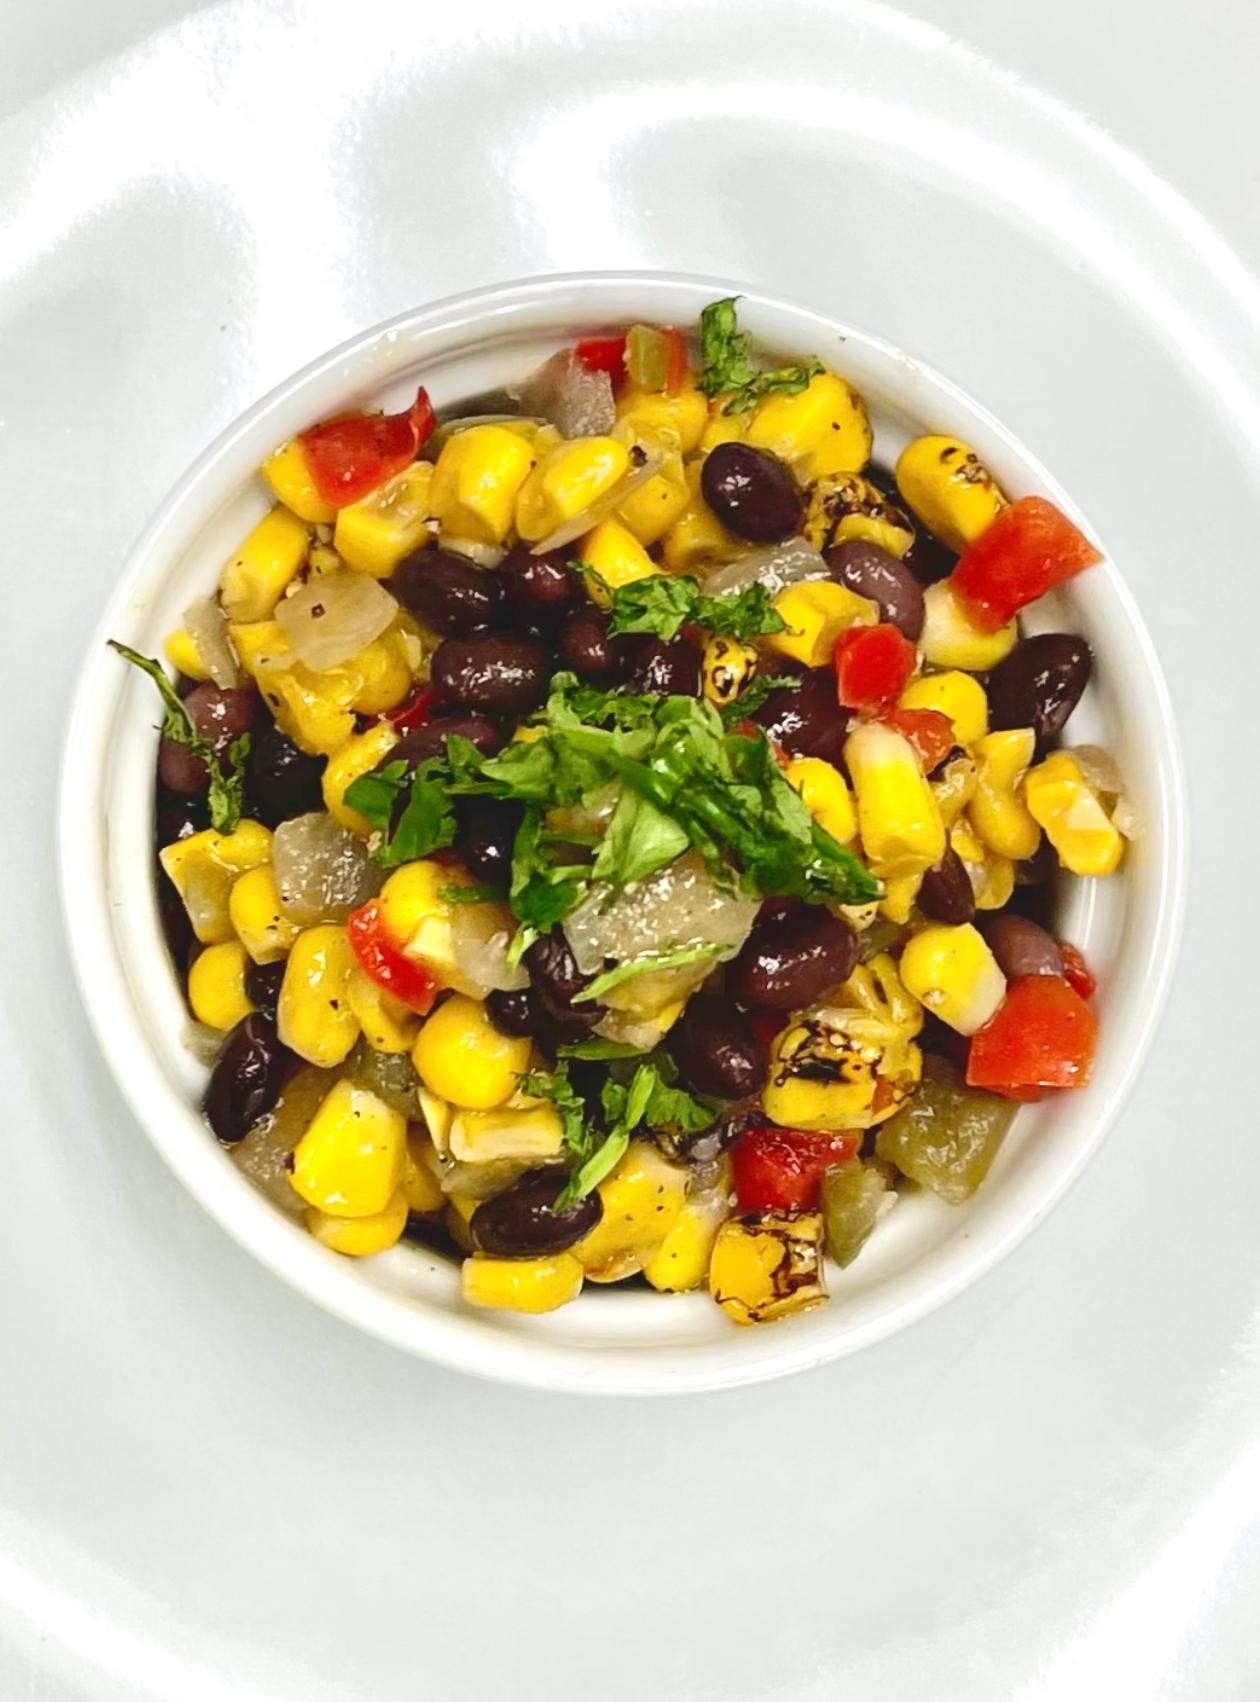 SIDE Black Bean, Corn and Red Pepper Salad